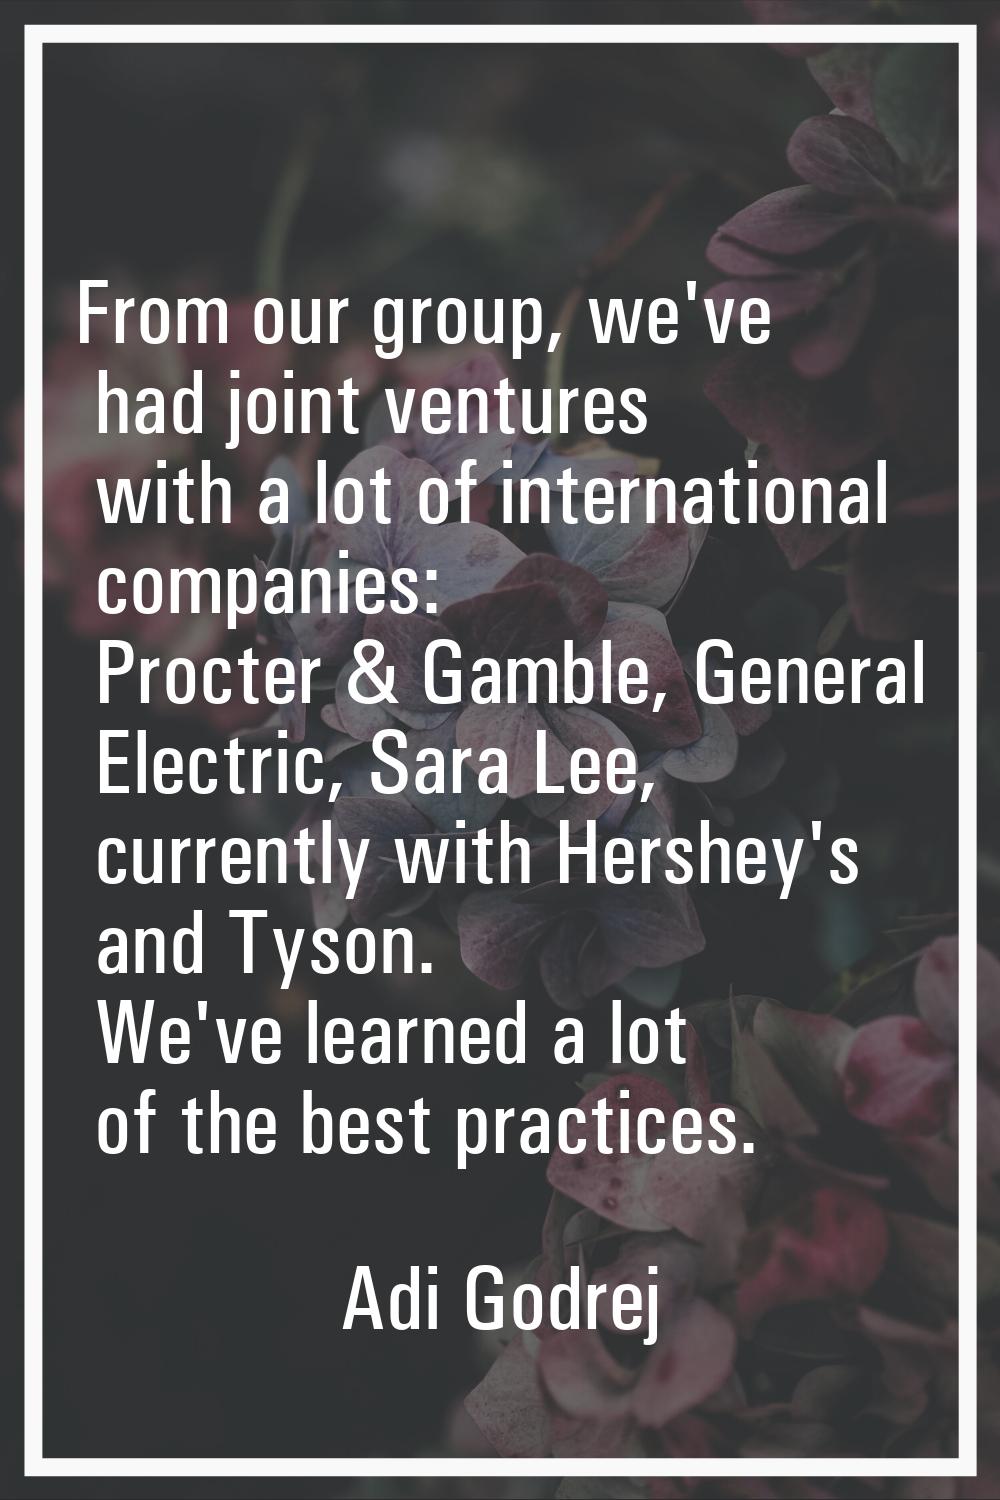 From our group, we've had joint ventures with a lot of international companies: Procter & Gamble, G